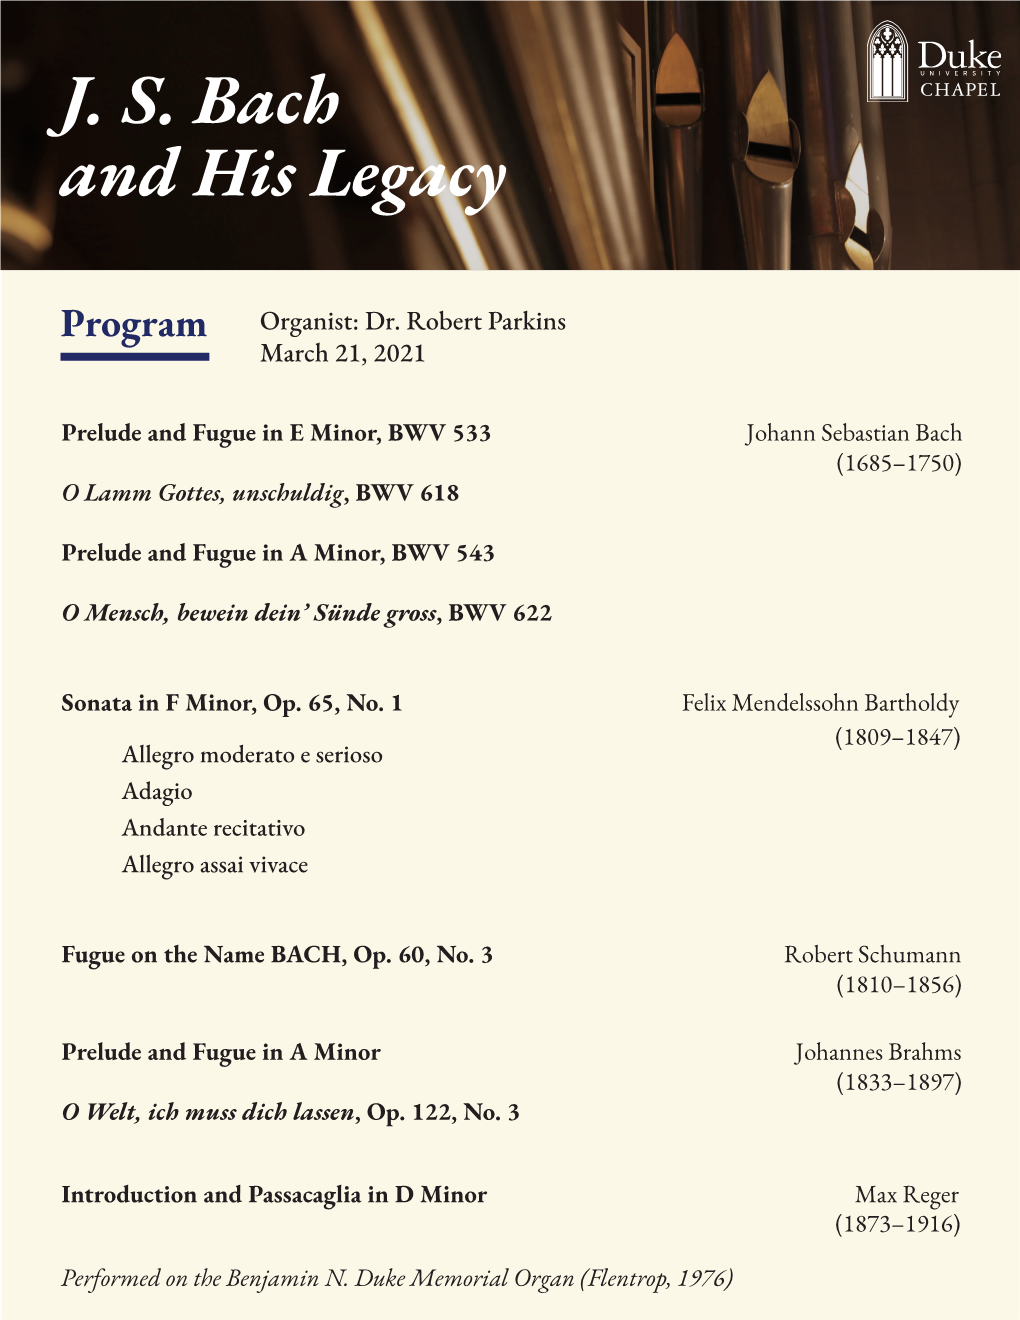 J. S. Bach and His Legacy Program